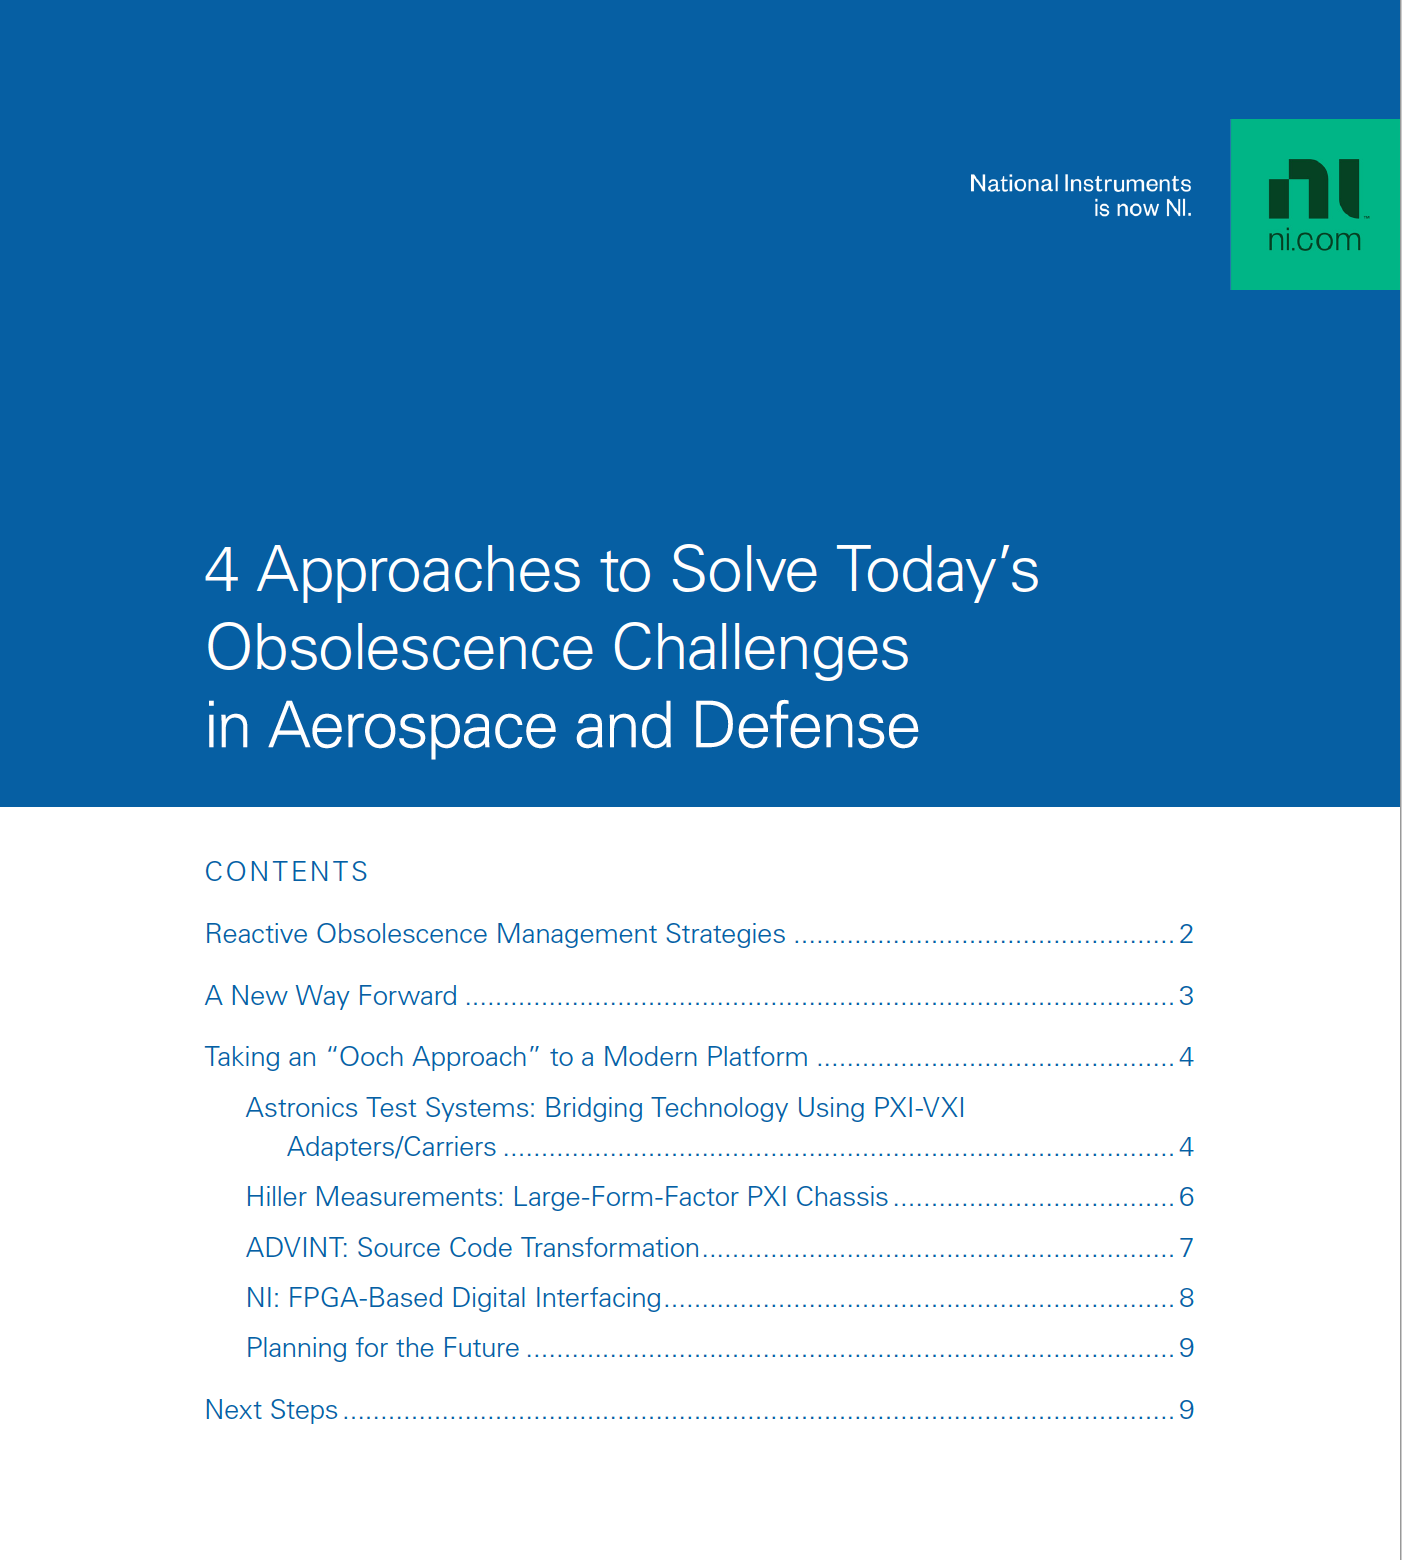 4 Approaches to Solve Today's Obsolescence Challenges in Aerospace and Defense